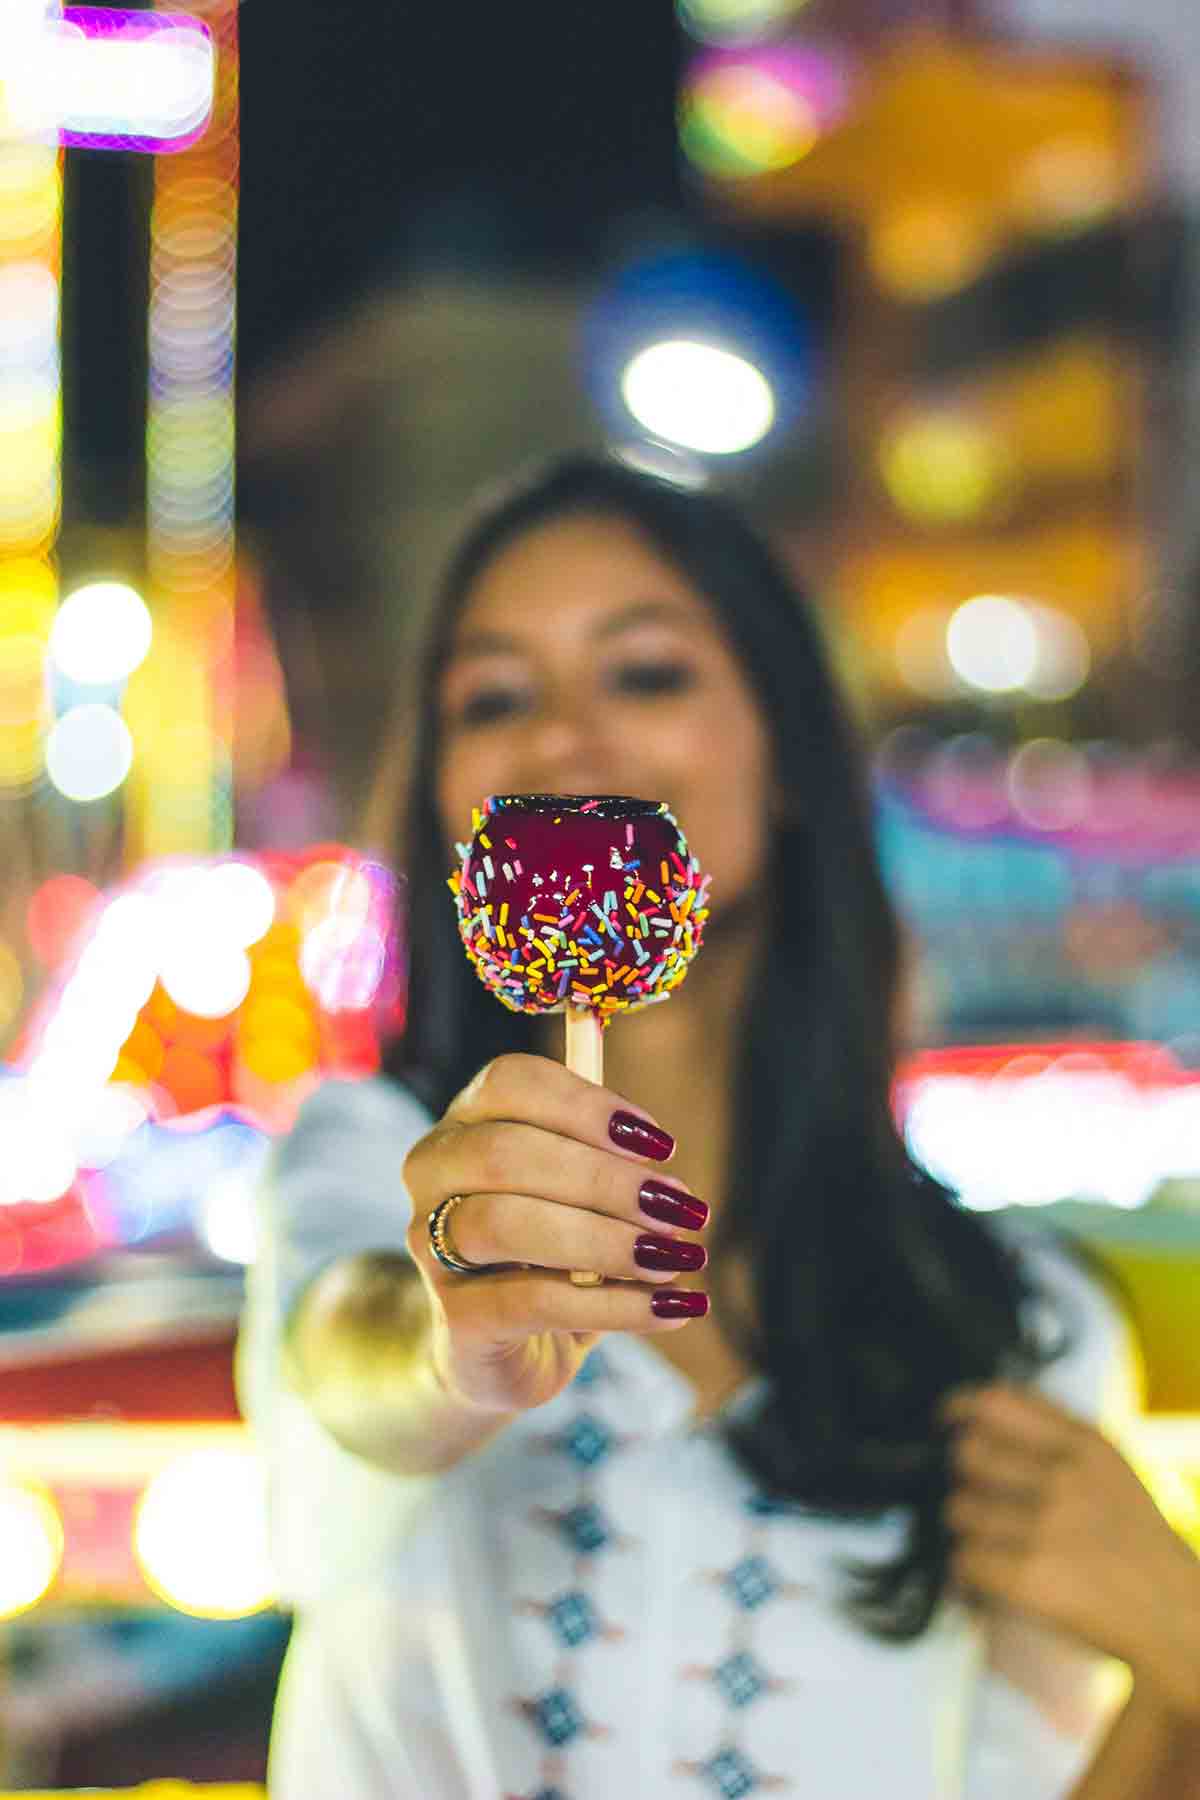 Girl Holding A Toffee Apple With Sprinkles On It